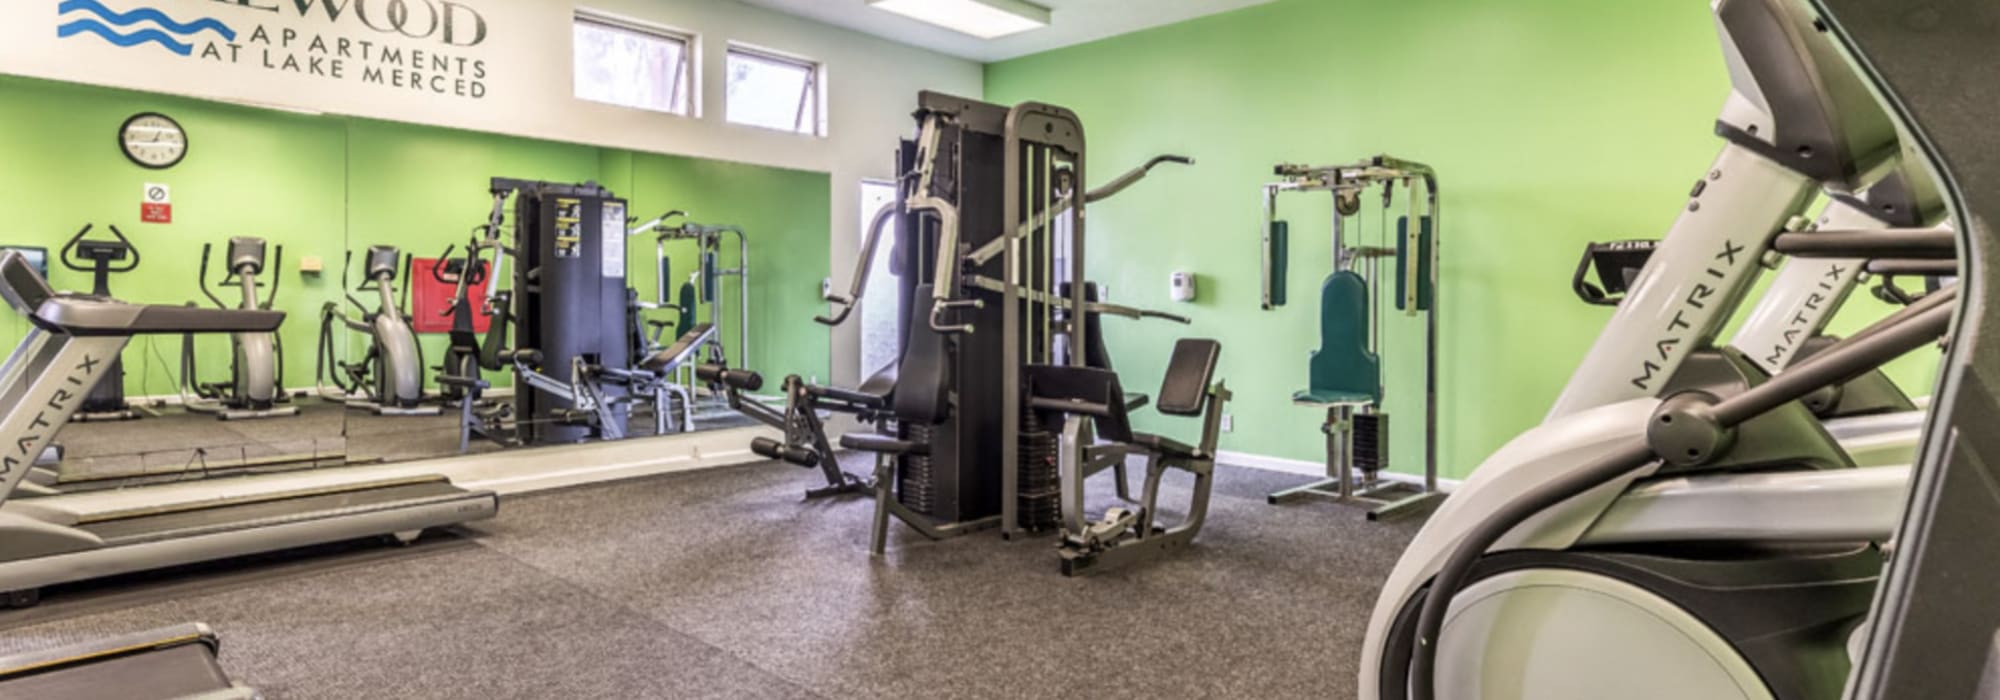 Cardio and weight lifting equipment in the fitness center at Lakewood Apartments at Lake Merced in San Francisco, California